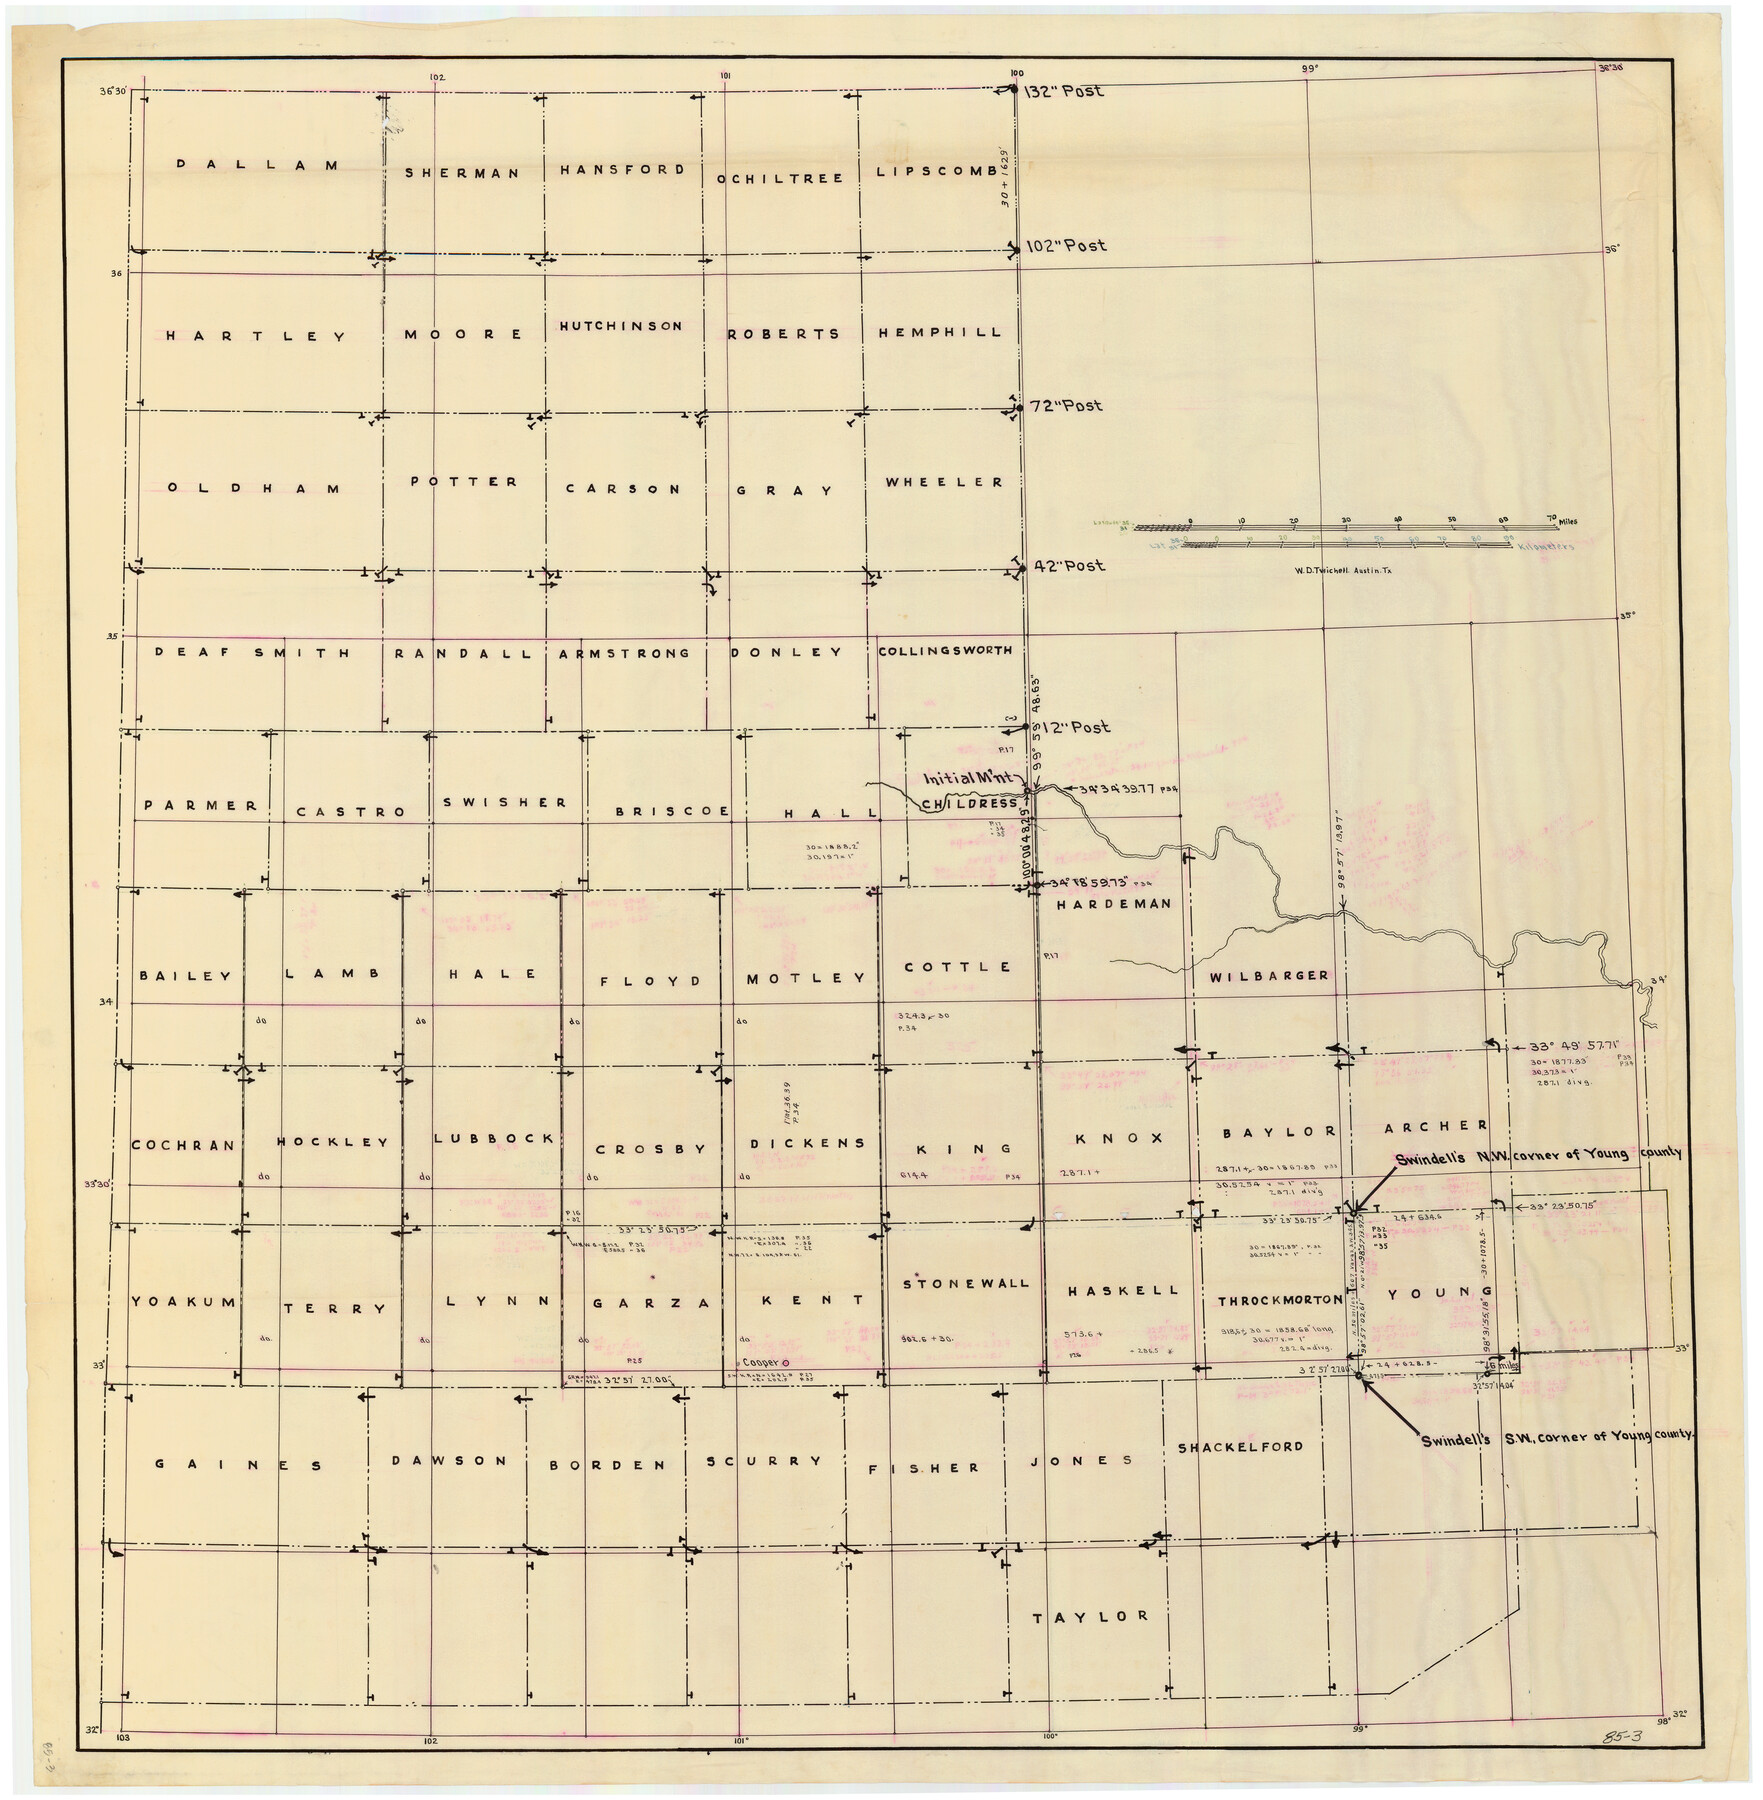 89951, [Panhandle Counties], Twichell Survey Records